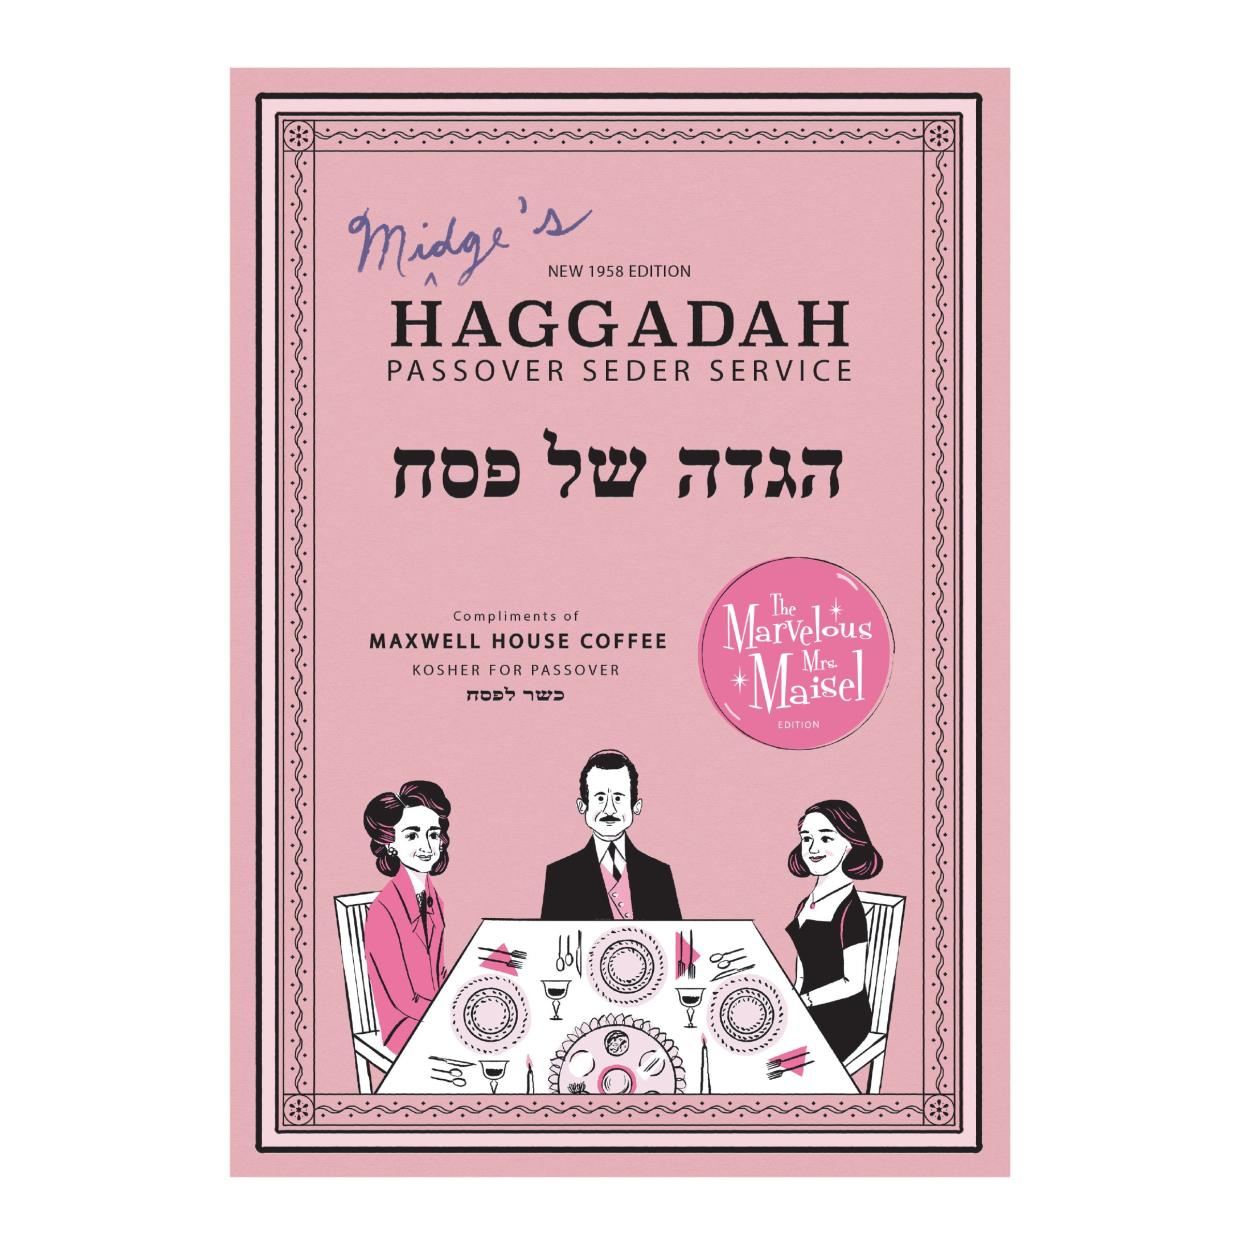 Maxwell House is offered a limited edition version of the "Mrs. Maisel" Haggadah in 2019.